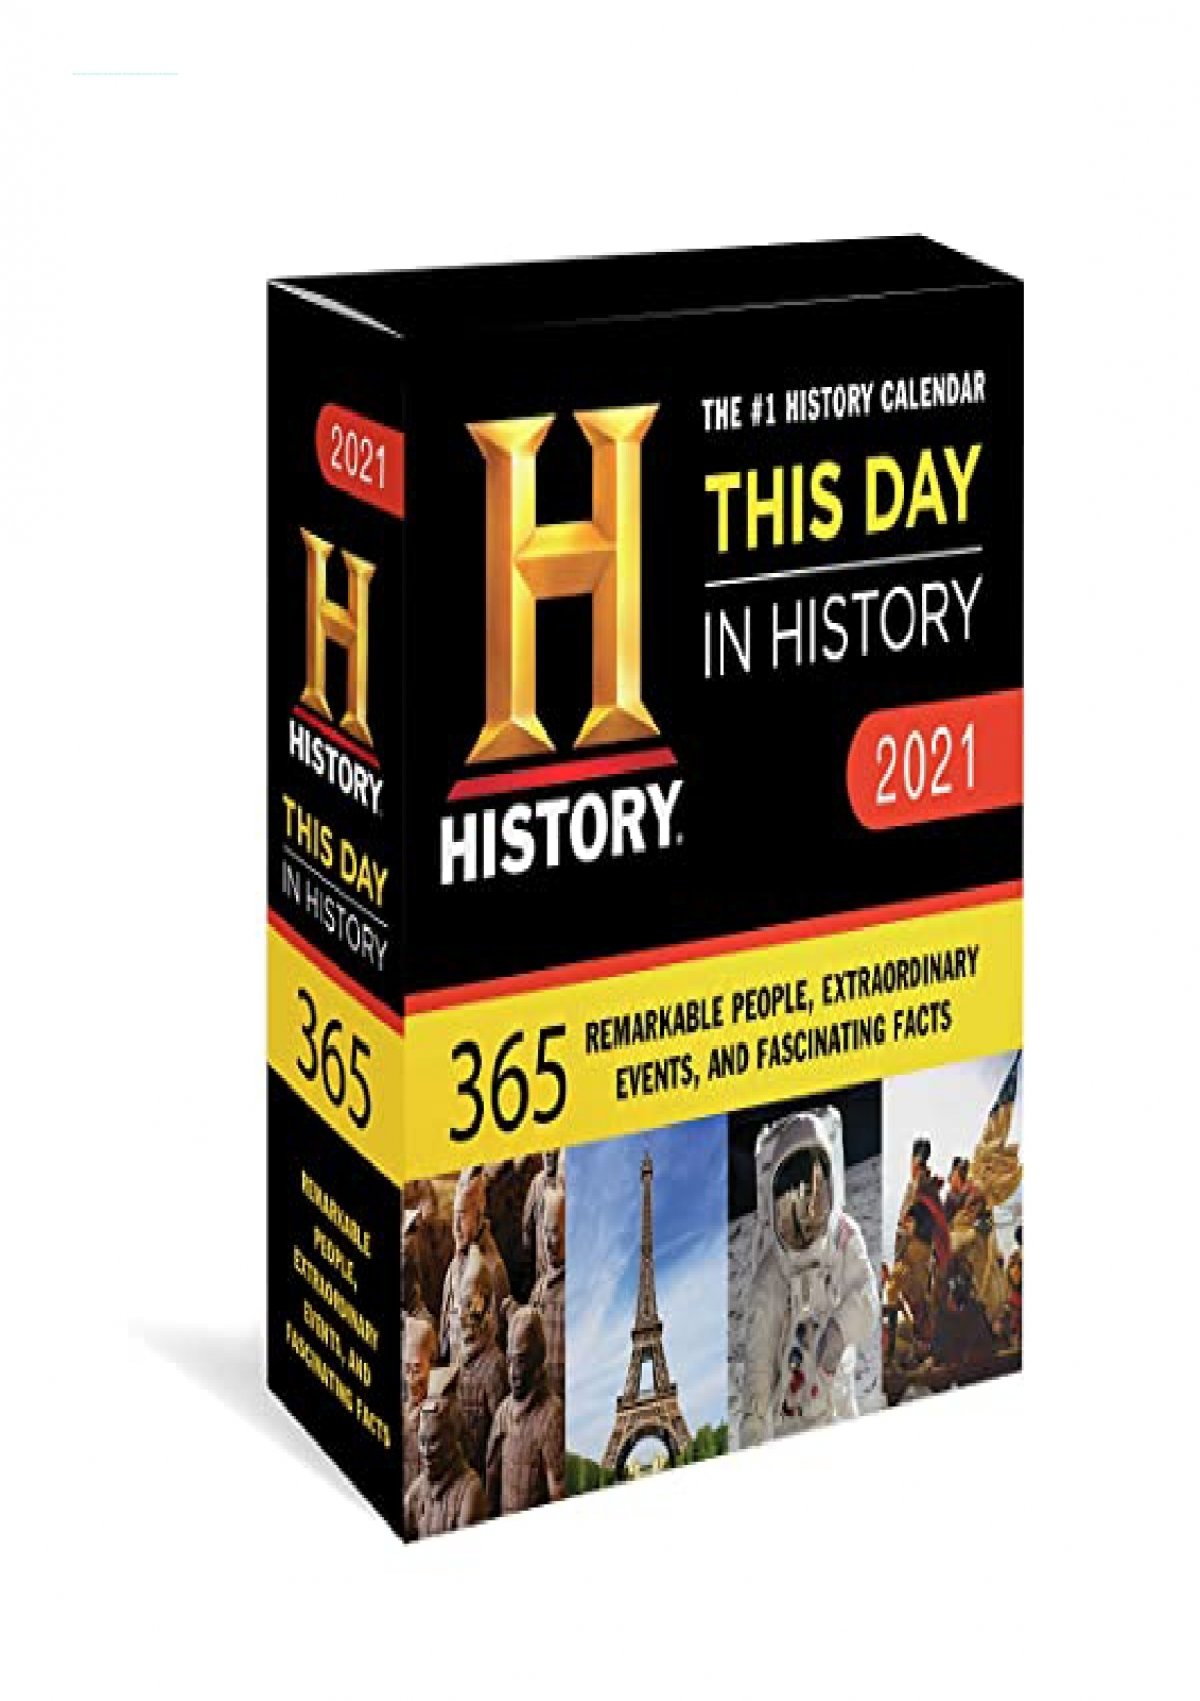 (PDF) 2021 History Channel This Day in History Boxed Calendar: 365